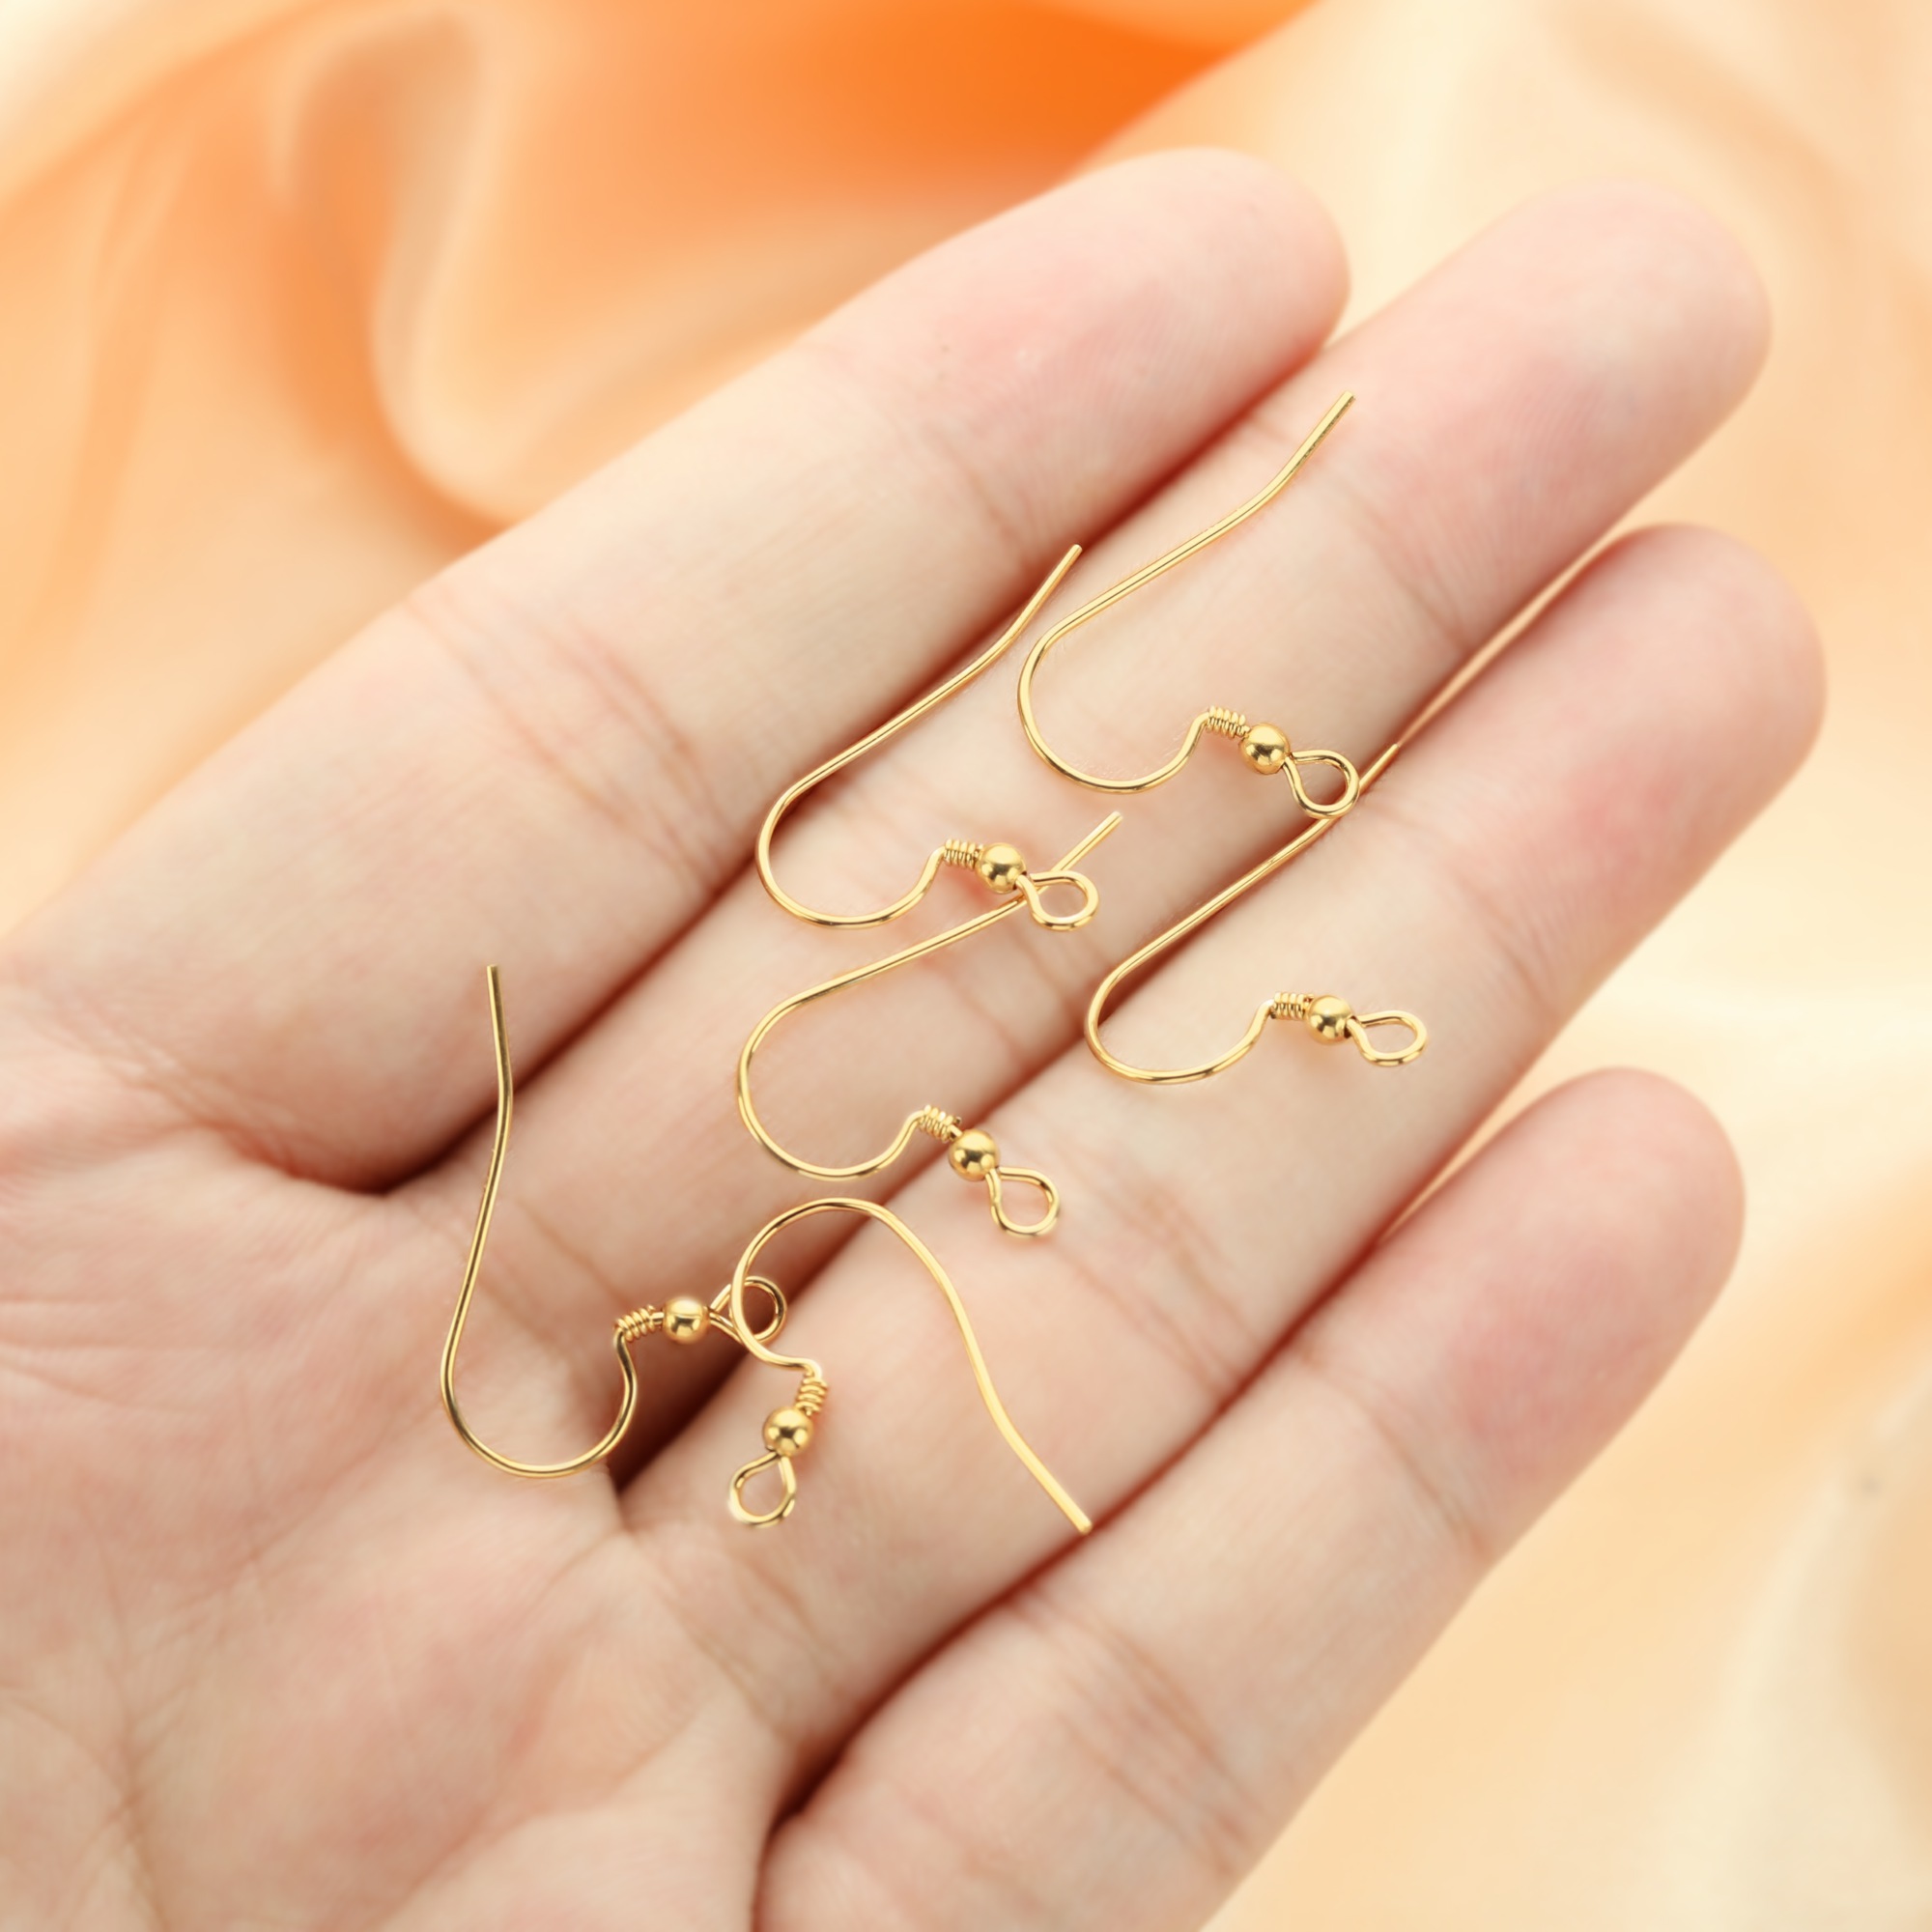 1Pair 13x15MM Ball End Ear Wires With Coil And 2MM Ball,14k Gold Filled Ear Wires,Minimalist Earrings,DIY Earrings Supplies 1705077 - Click Image to Close